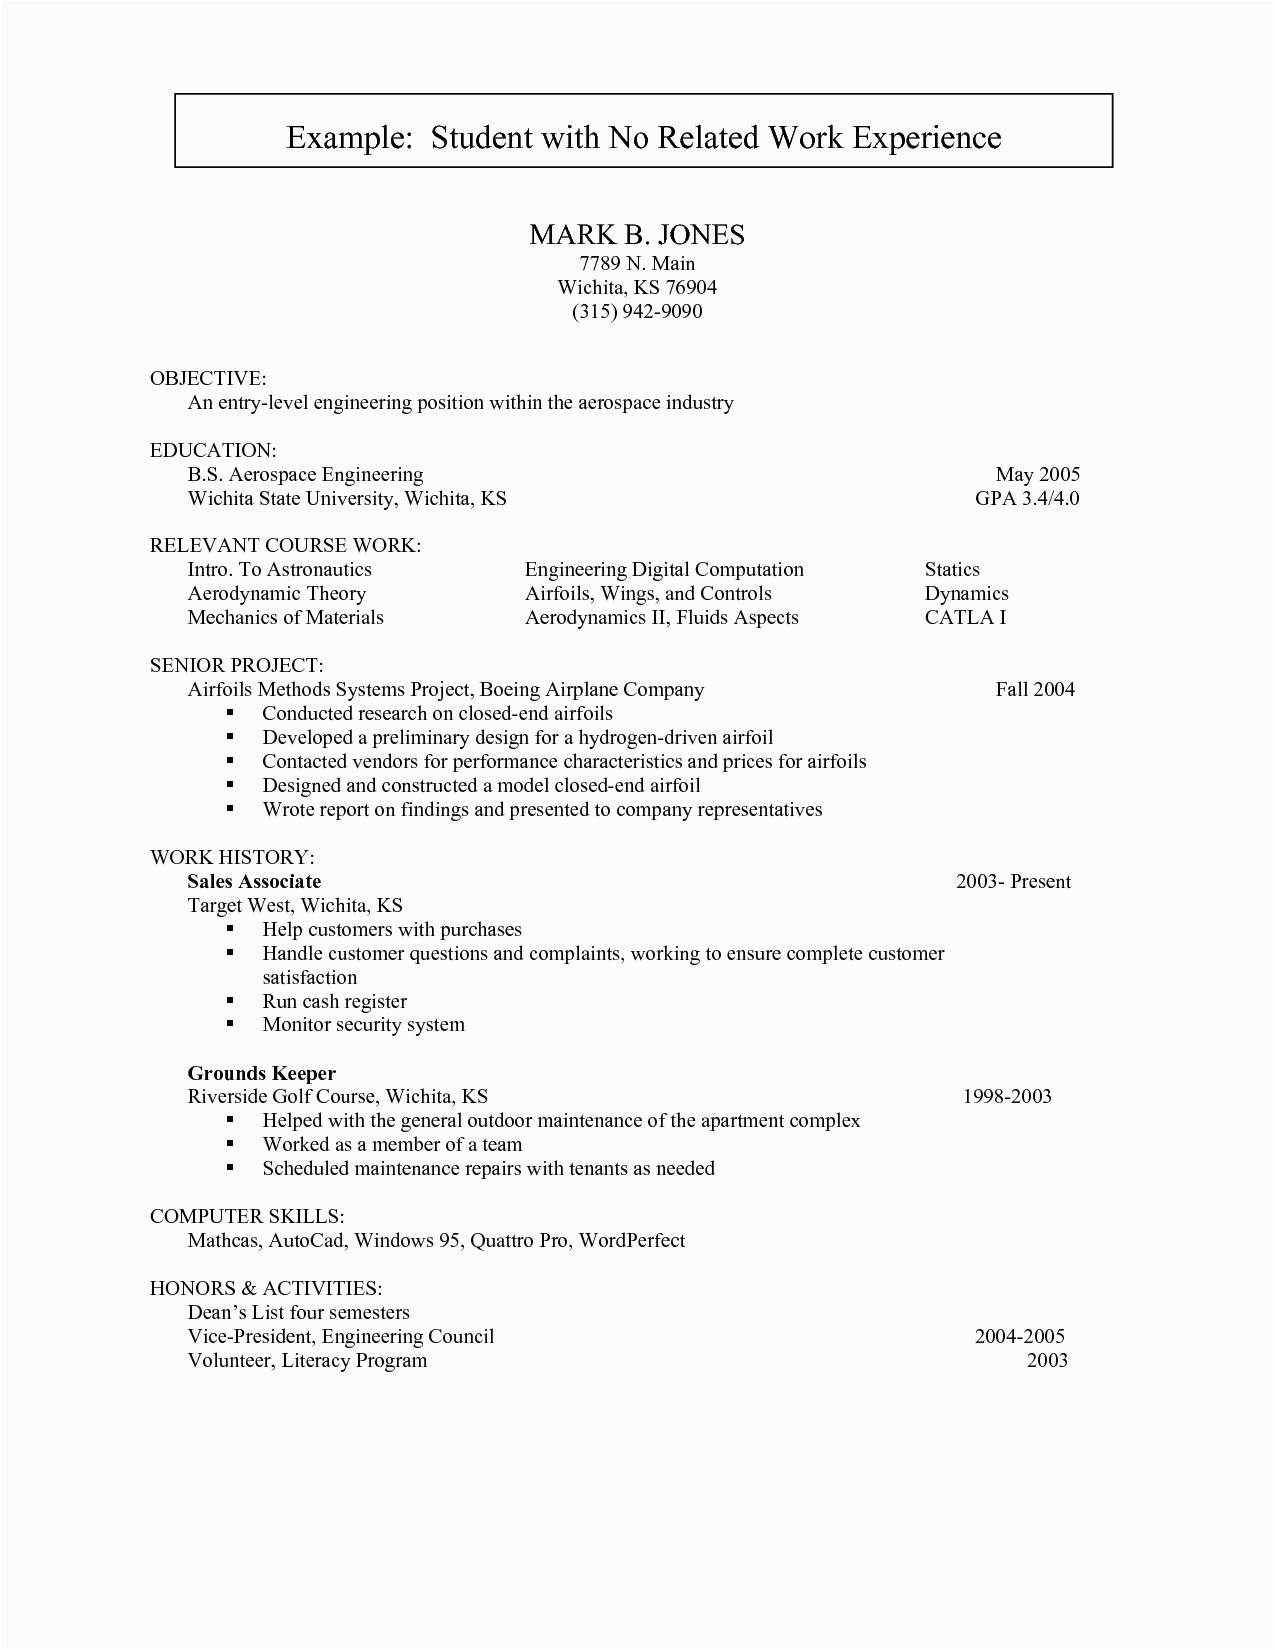 Sample Resume with Diverse Work Experience Resume Work Experience Samples